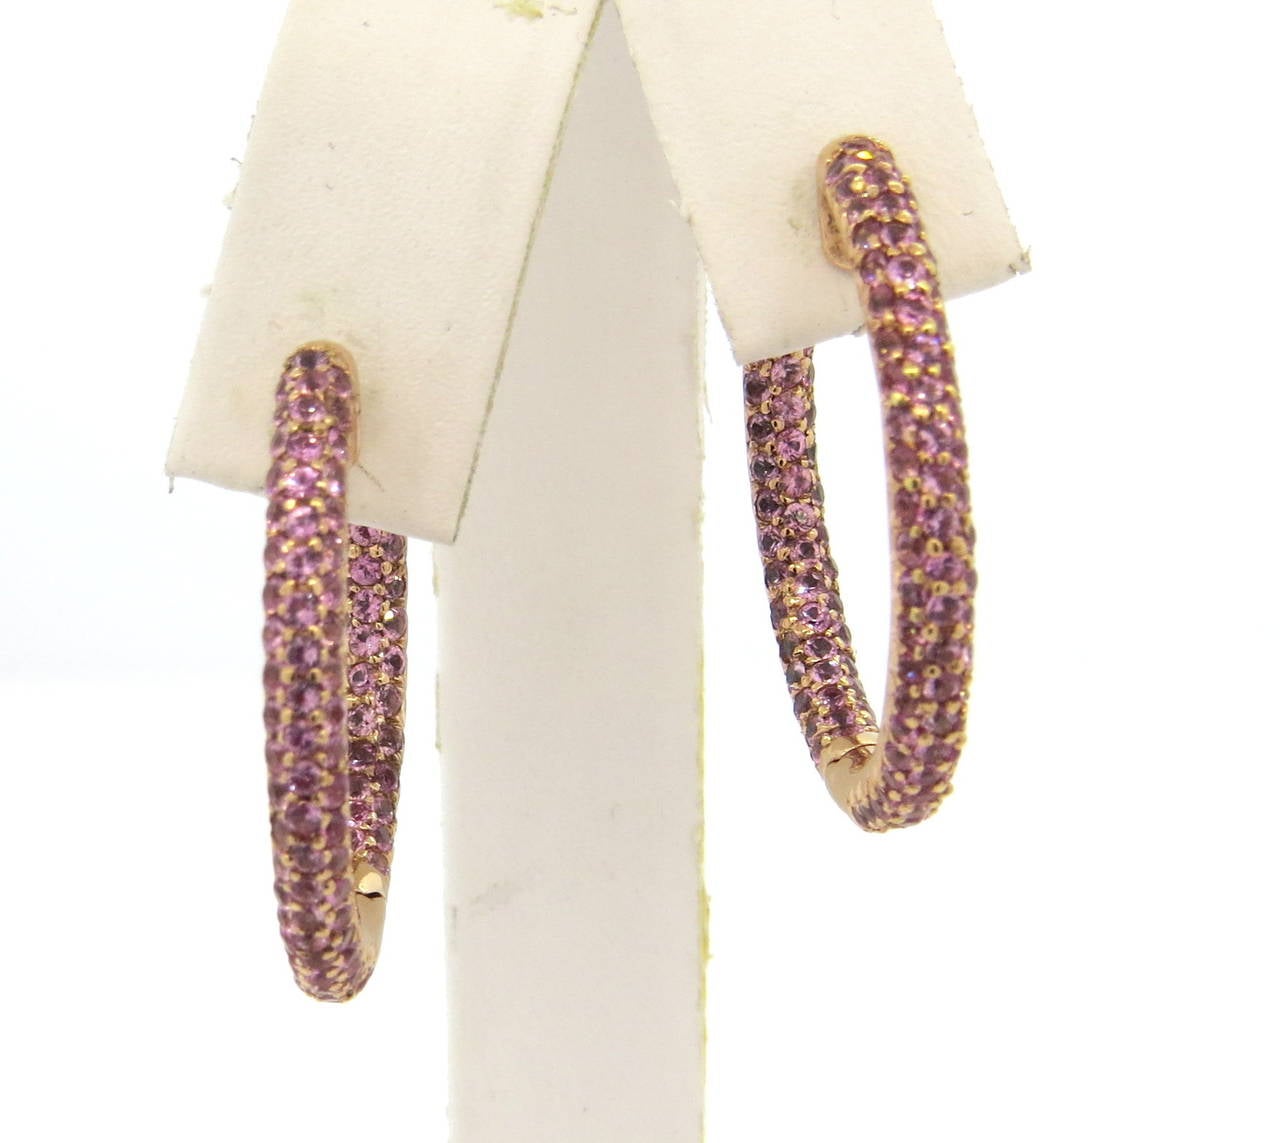 18k rose gold hoop earrings,  decorated with inside out set 4.77ctw pink sapphires. Earrings measure 32mm in diameter and 3.3mm wide. Marked S 477, 18k 750. Weight - 12.4 grams